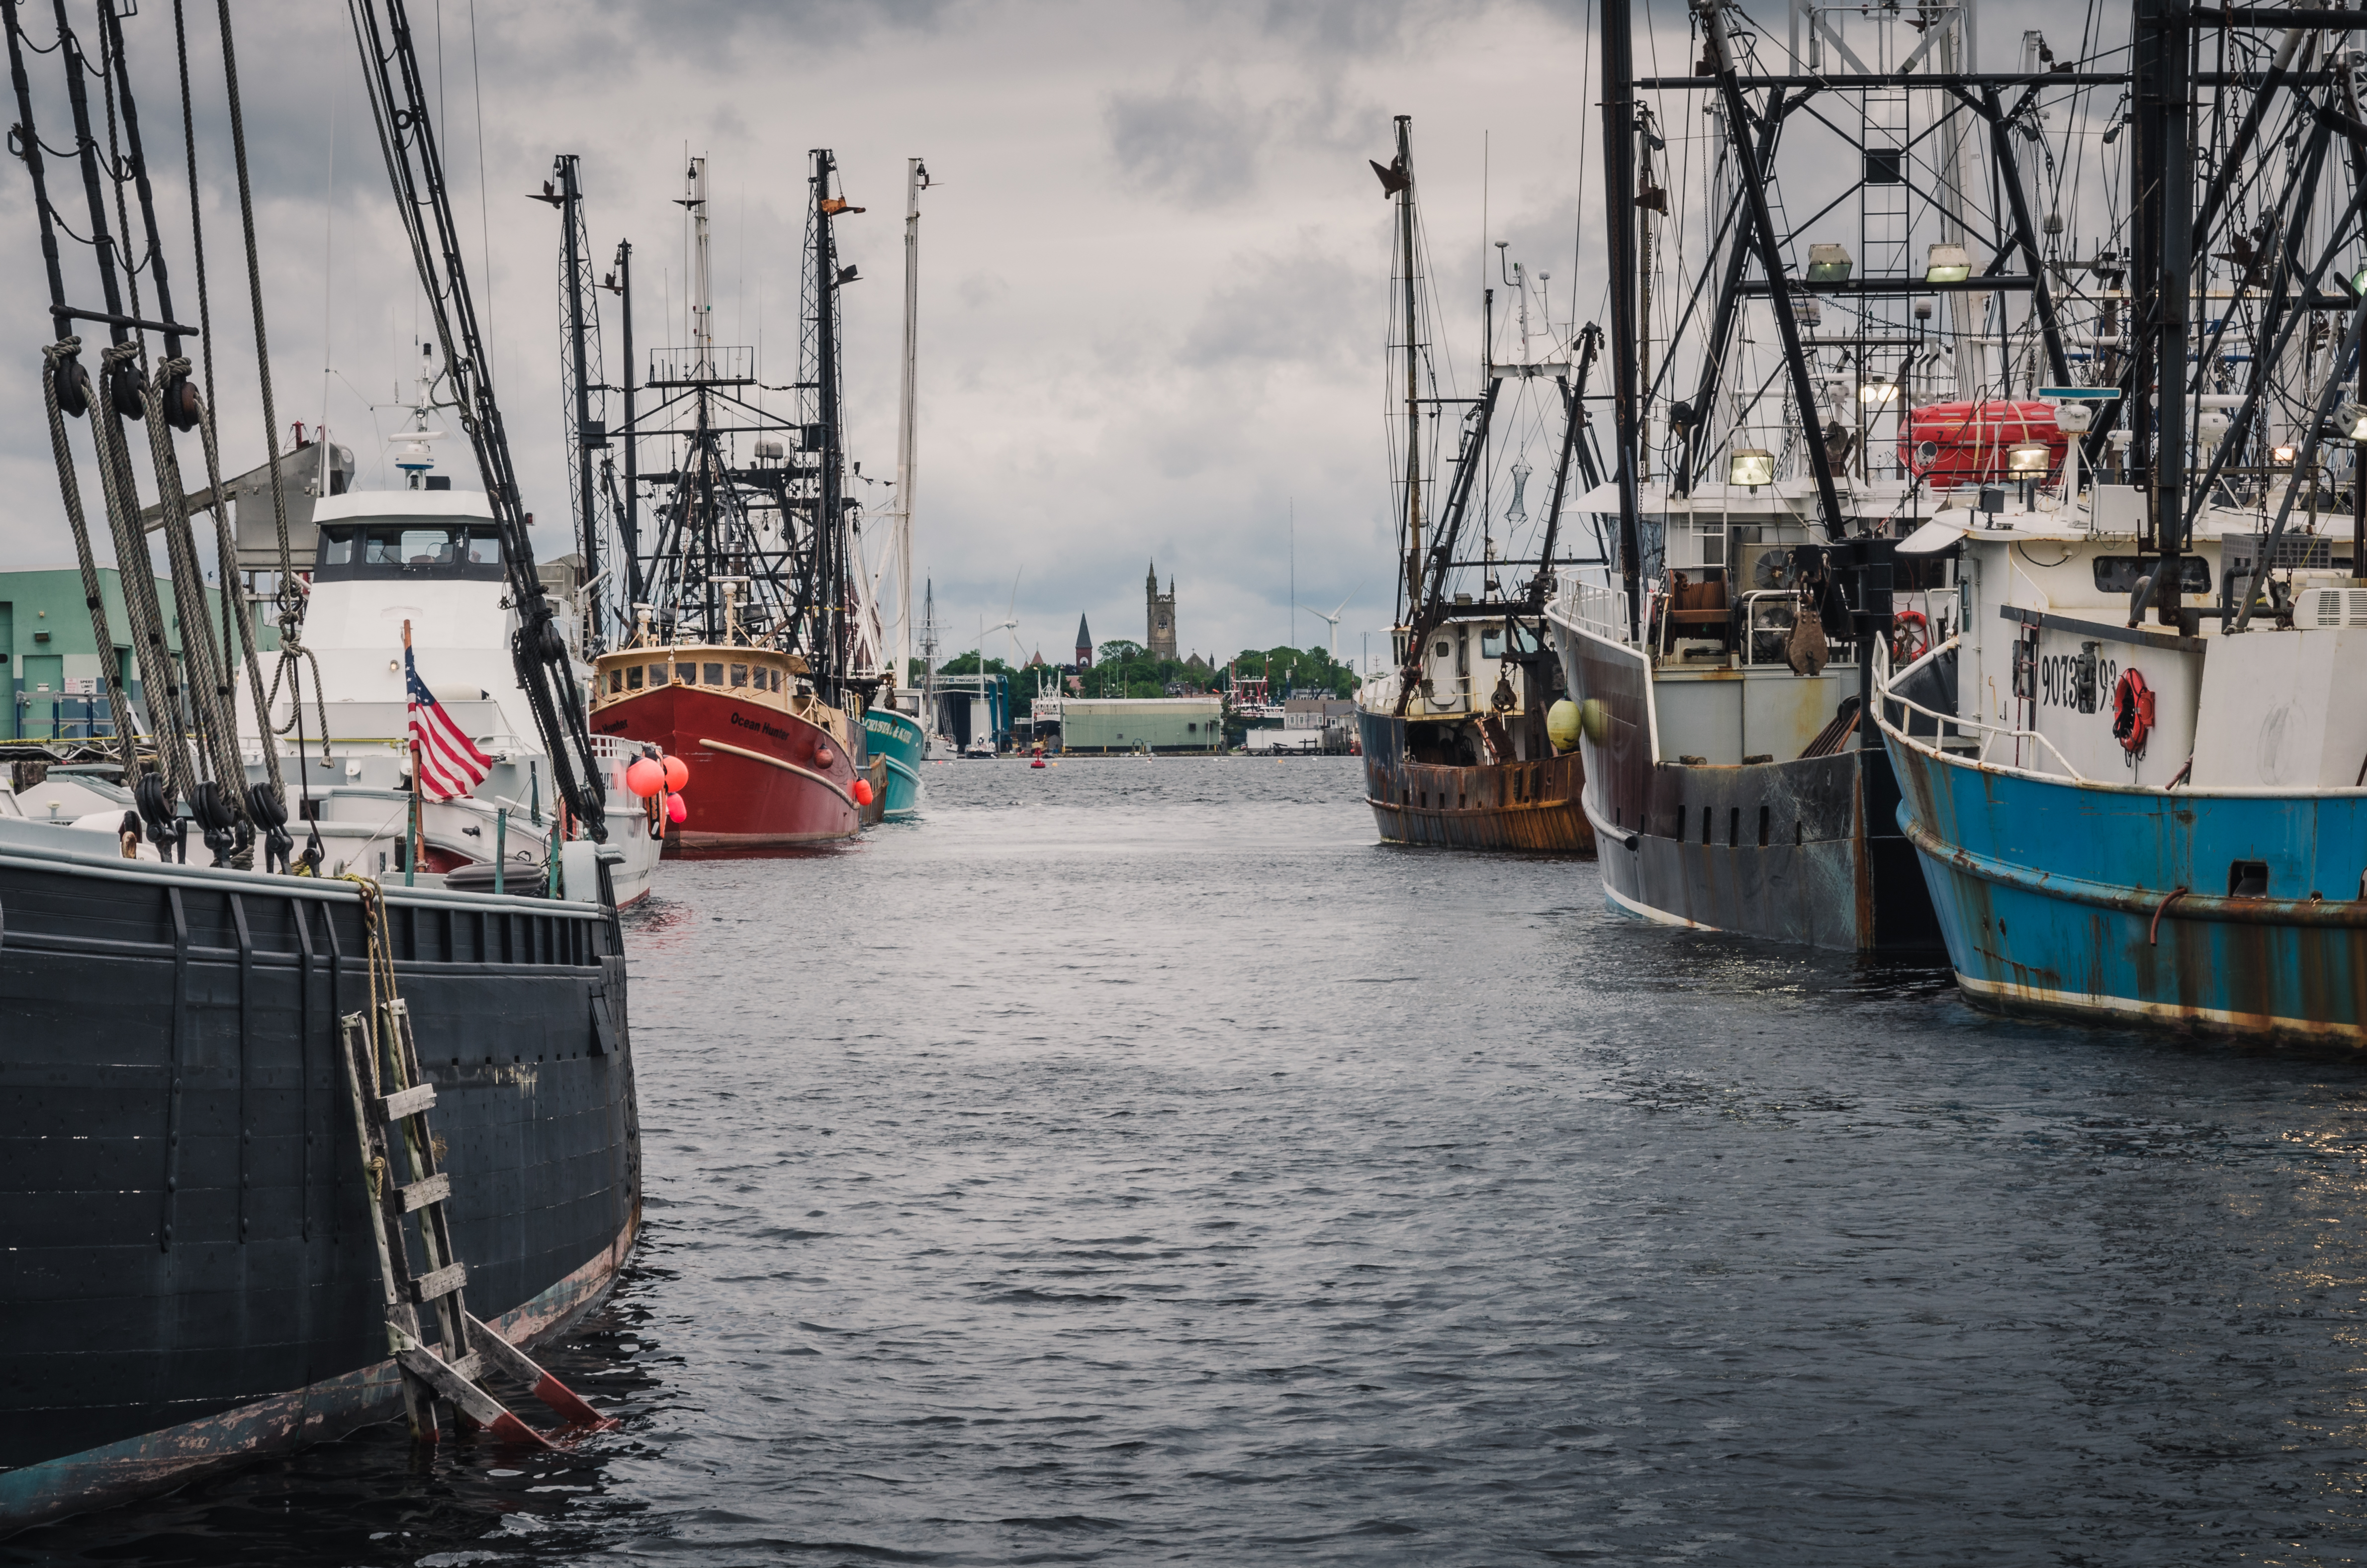 50 fishing businesses based in New Bedford, Mass. have signed onto a federal lawsuit over offshore wind construction (Viktor Posnov—Getty Images)